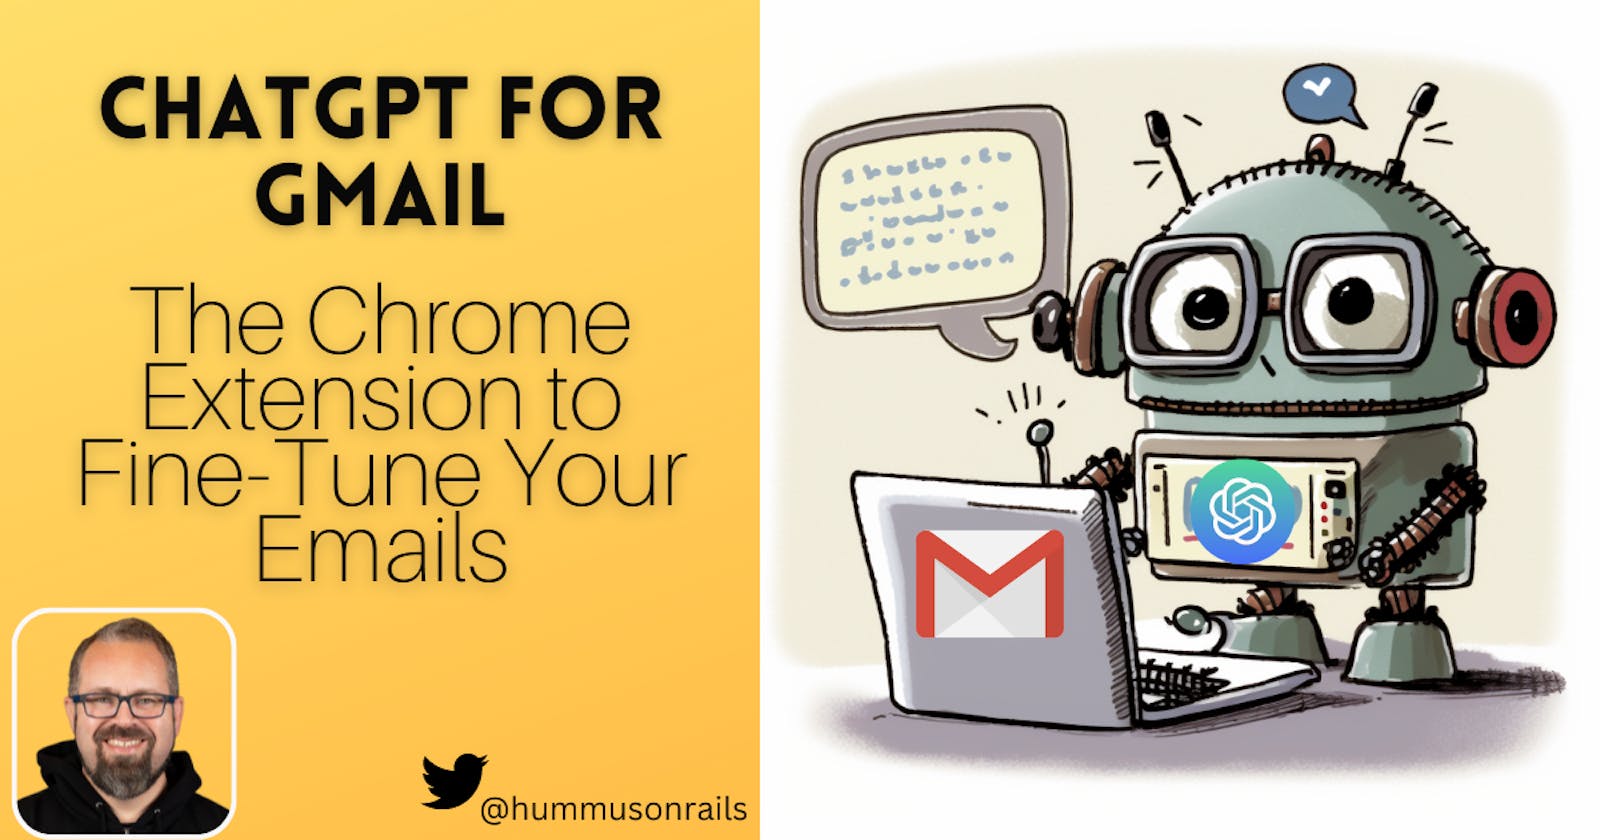 ChatGPT for Gmail: The Chrome Extension to Fine-Tune Your Emails